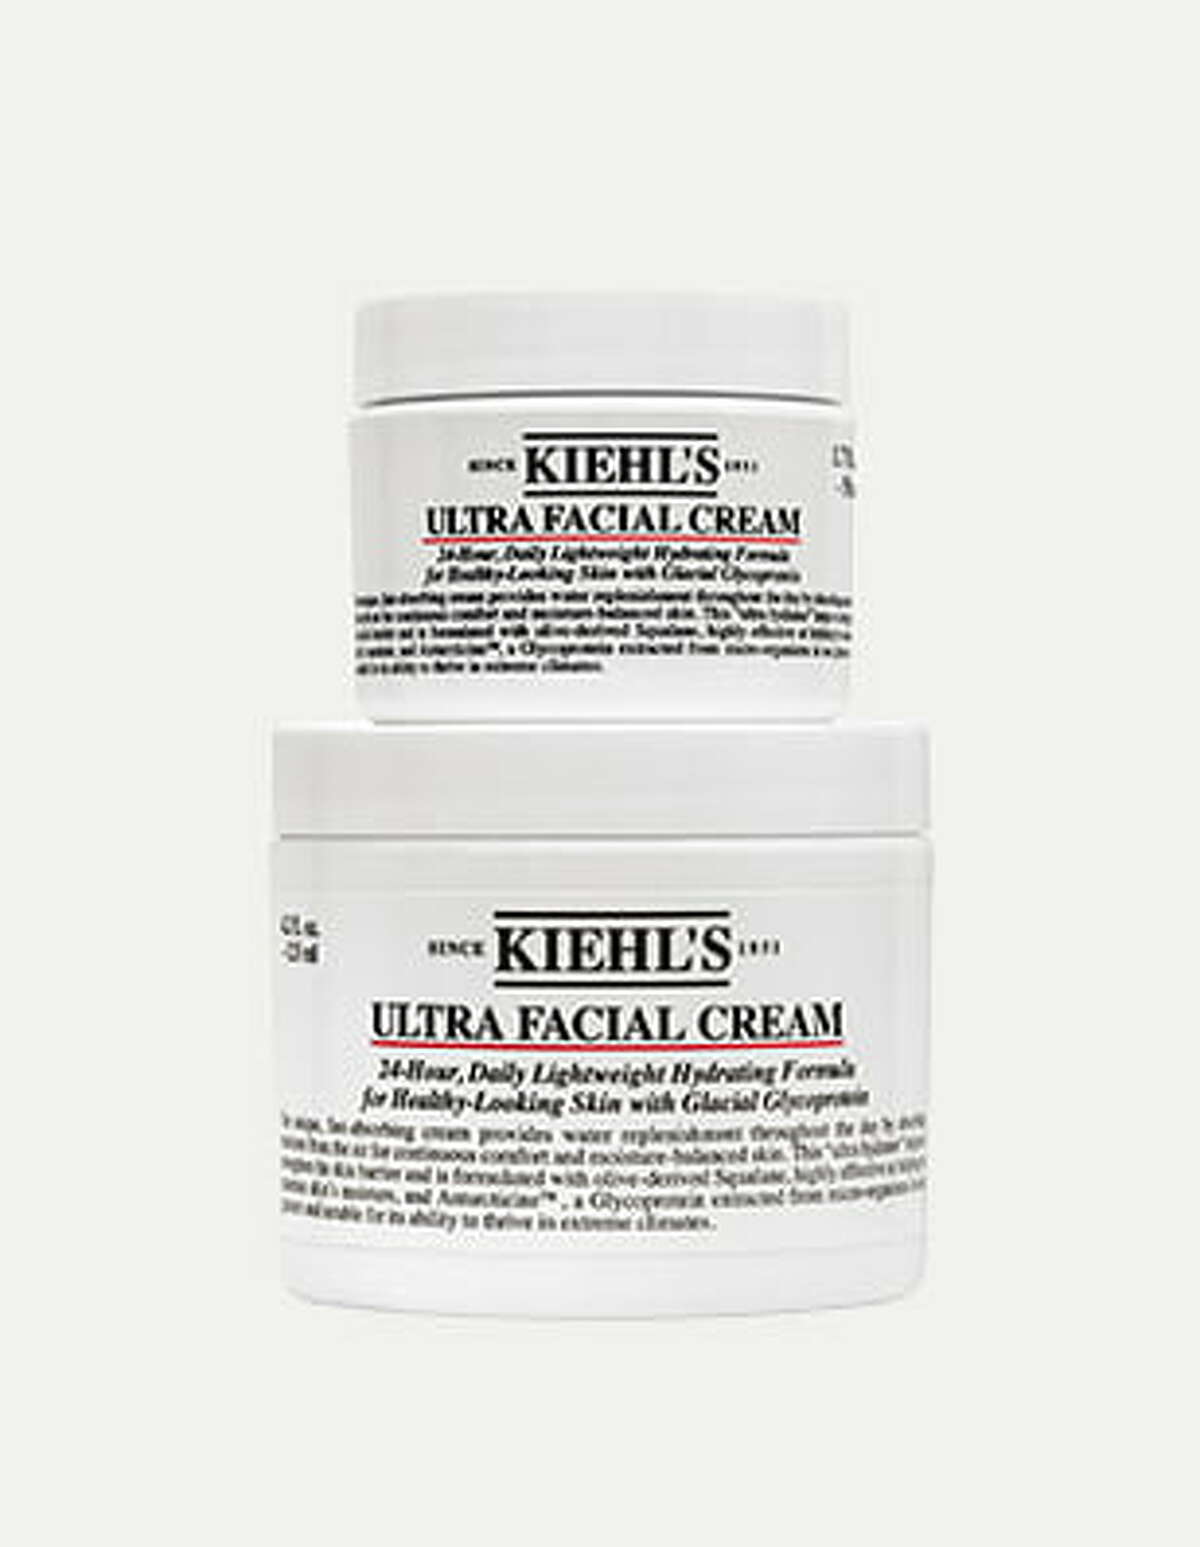 Nordstrom's Cyber Sales includes designer clothes, accessories and beauty products, like this Kiehl's Ultra Facial Cream Home & Away Duo for $50. Buy at Nordstrom